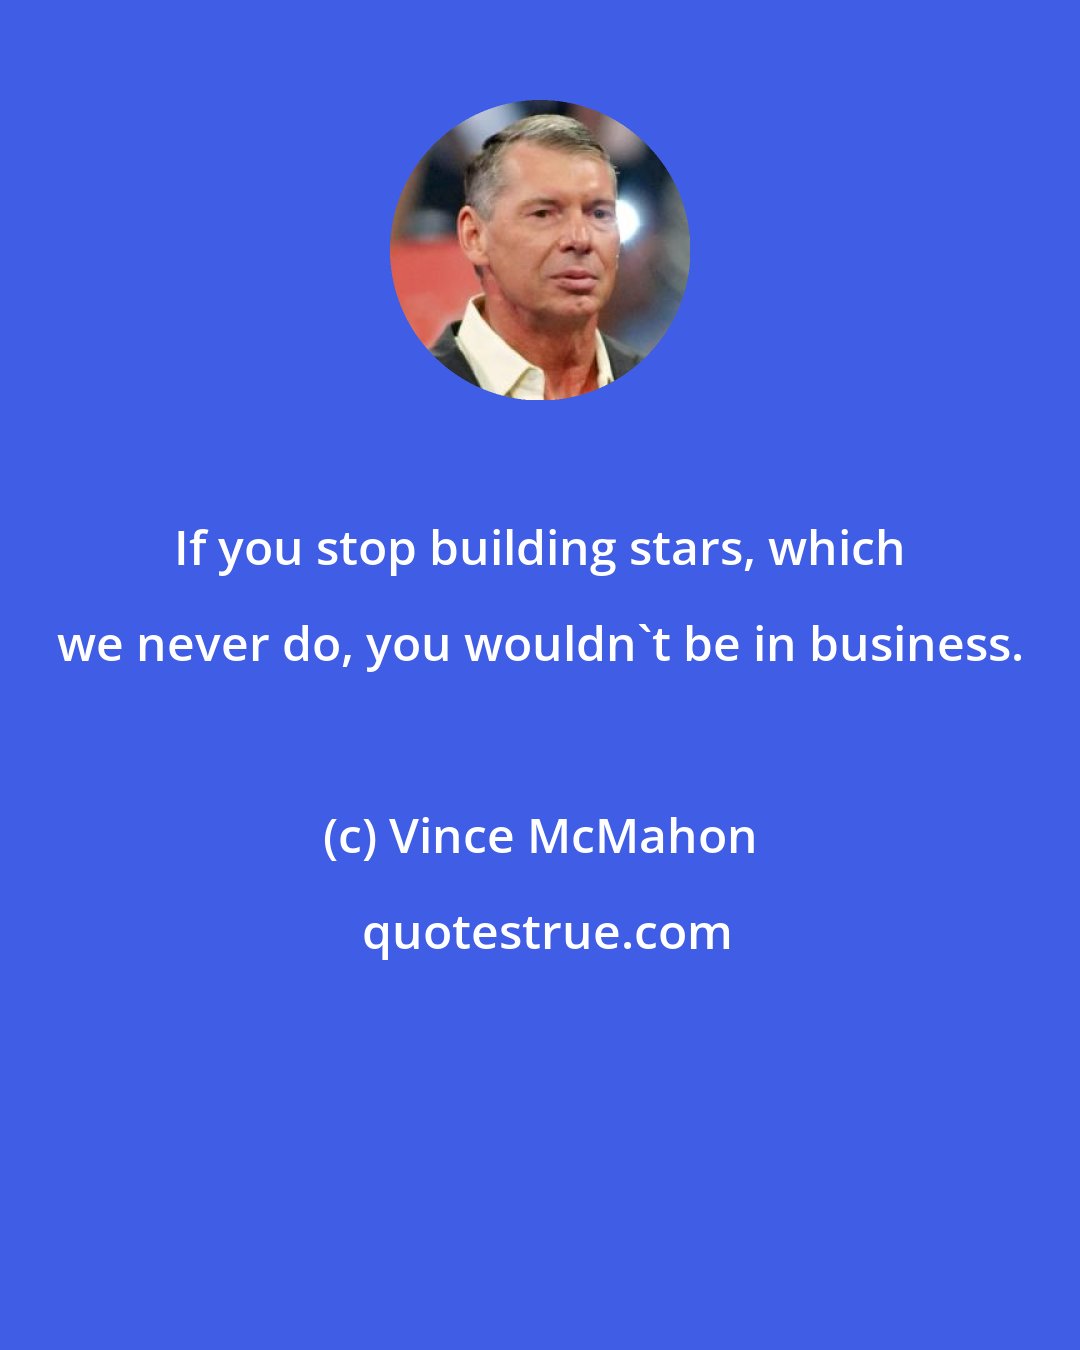 Vince McMahon: If you stop building stars, which we never do, you wouldn't be in business.